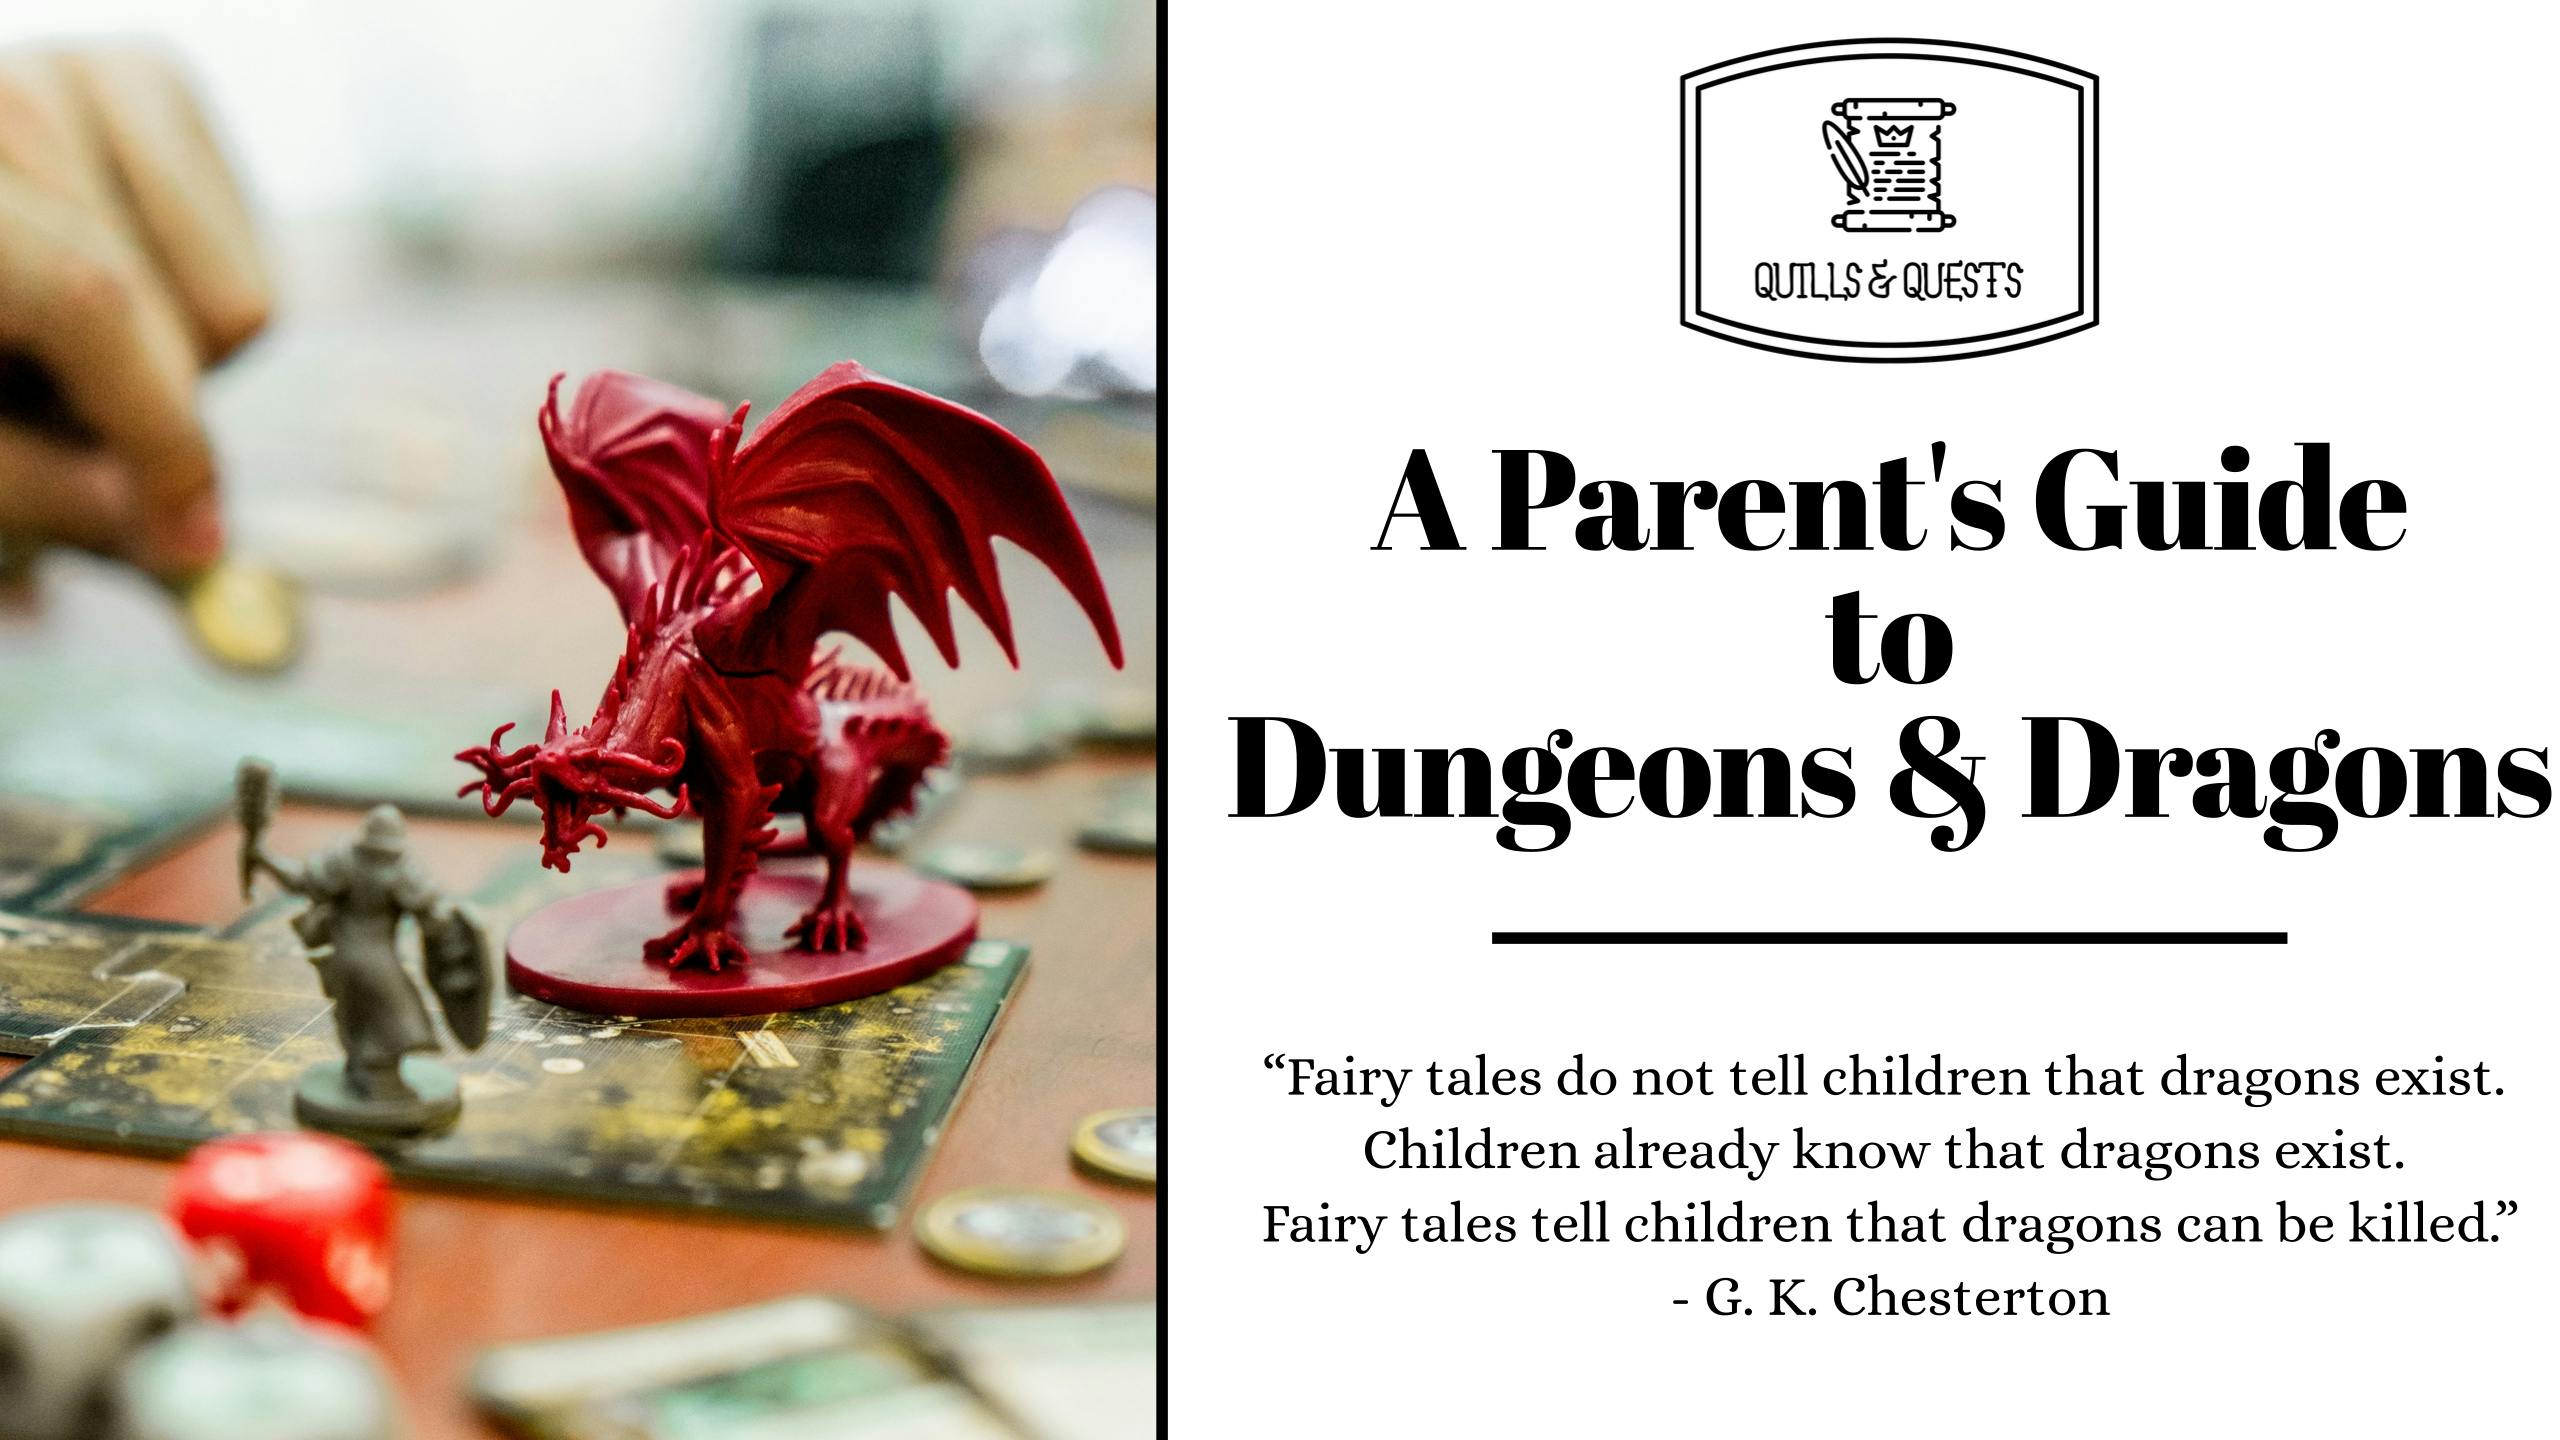 A Parent's Guide to Dungeons & Dragons